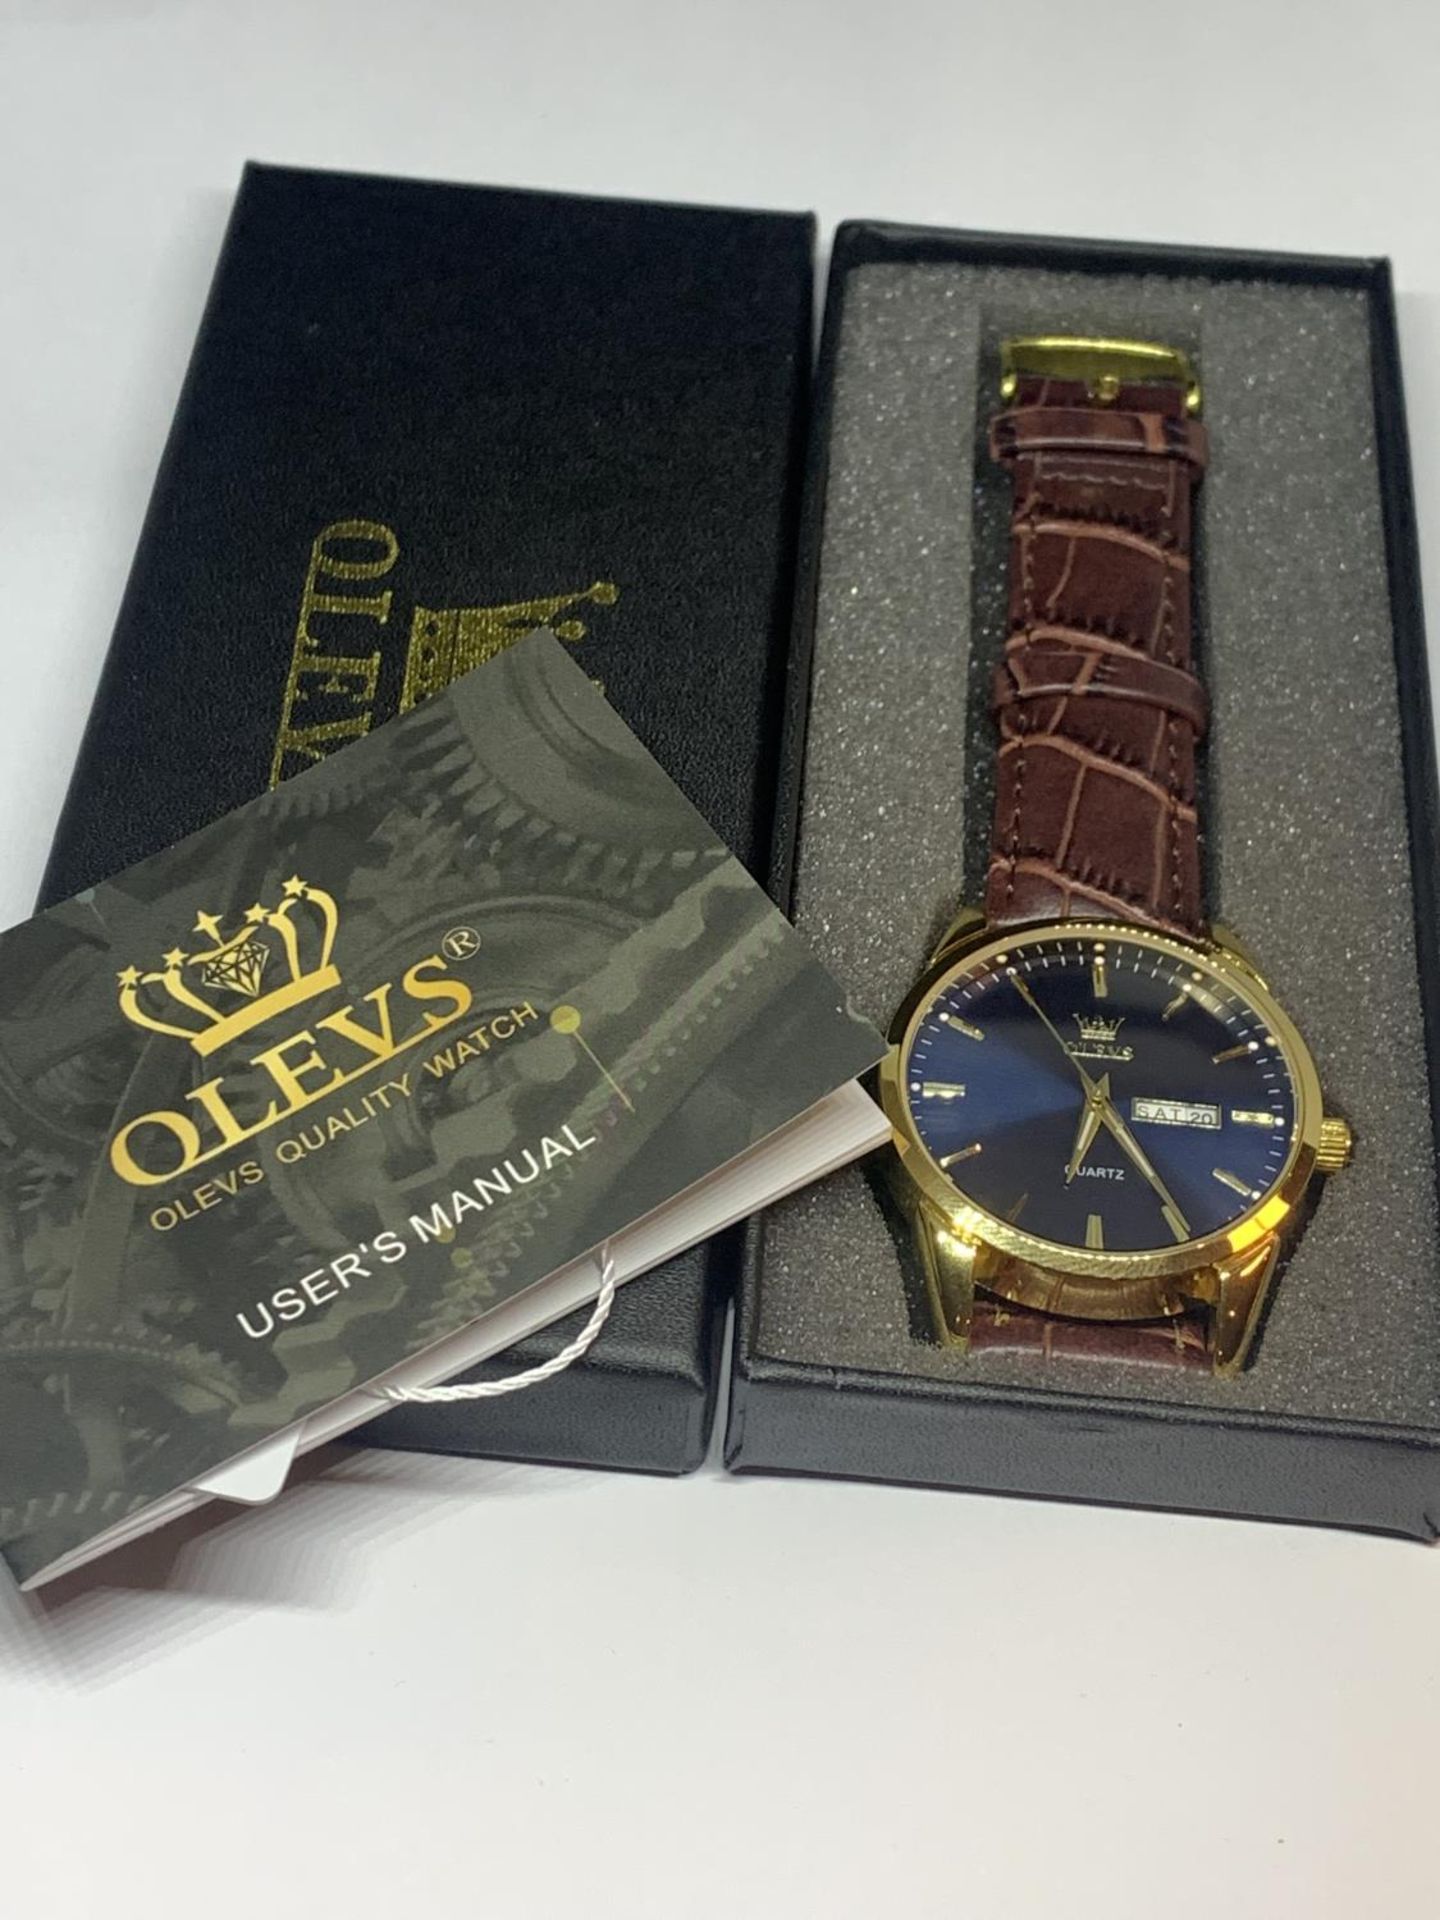 AN AS NEW AND BOXED OLEVS WRIST WATCH SEEN WORKING BUT NO WARRANTY